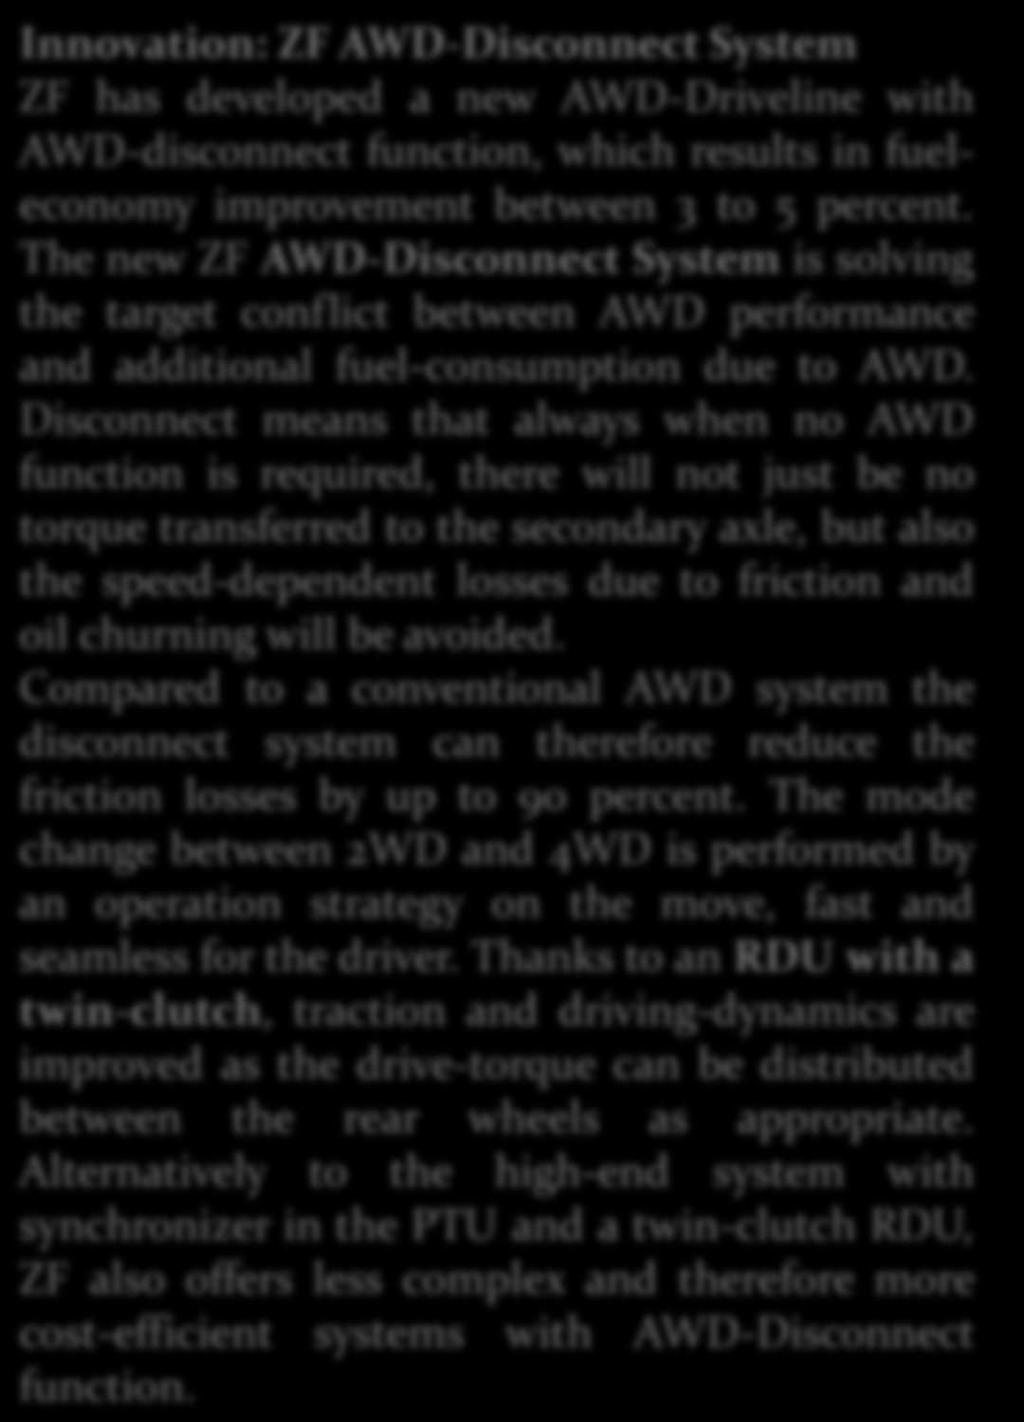 The mode change between 2WD and 4WD is performed by an operation strategy on the move, fast and seamless for the driver.